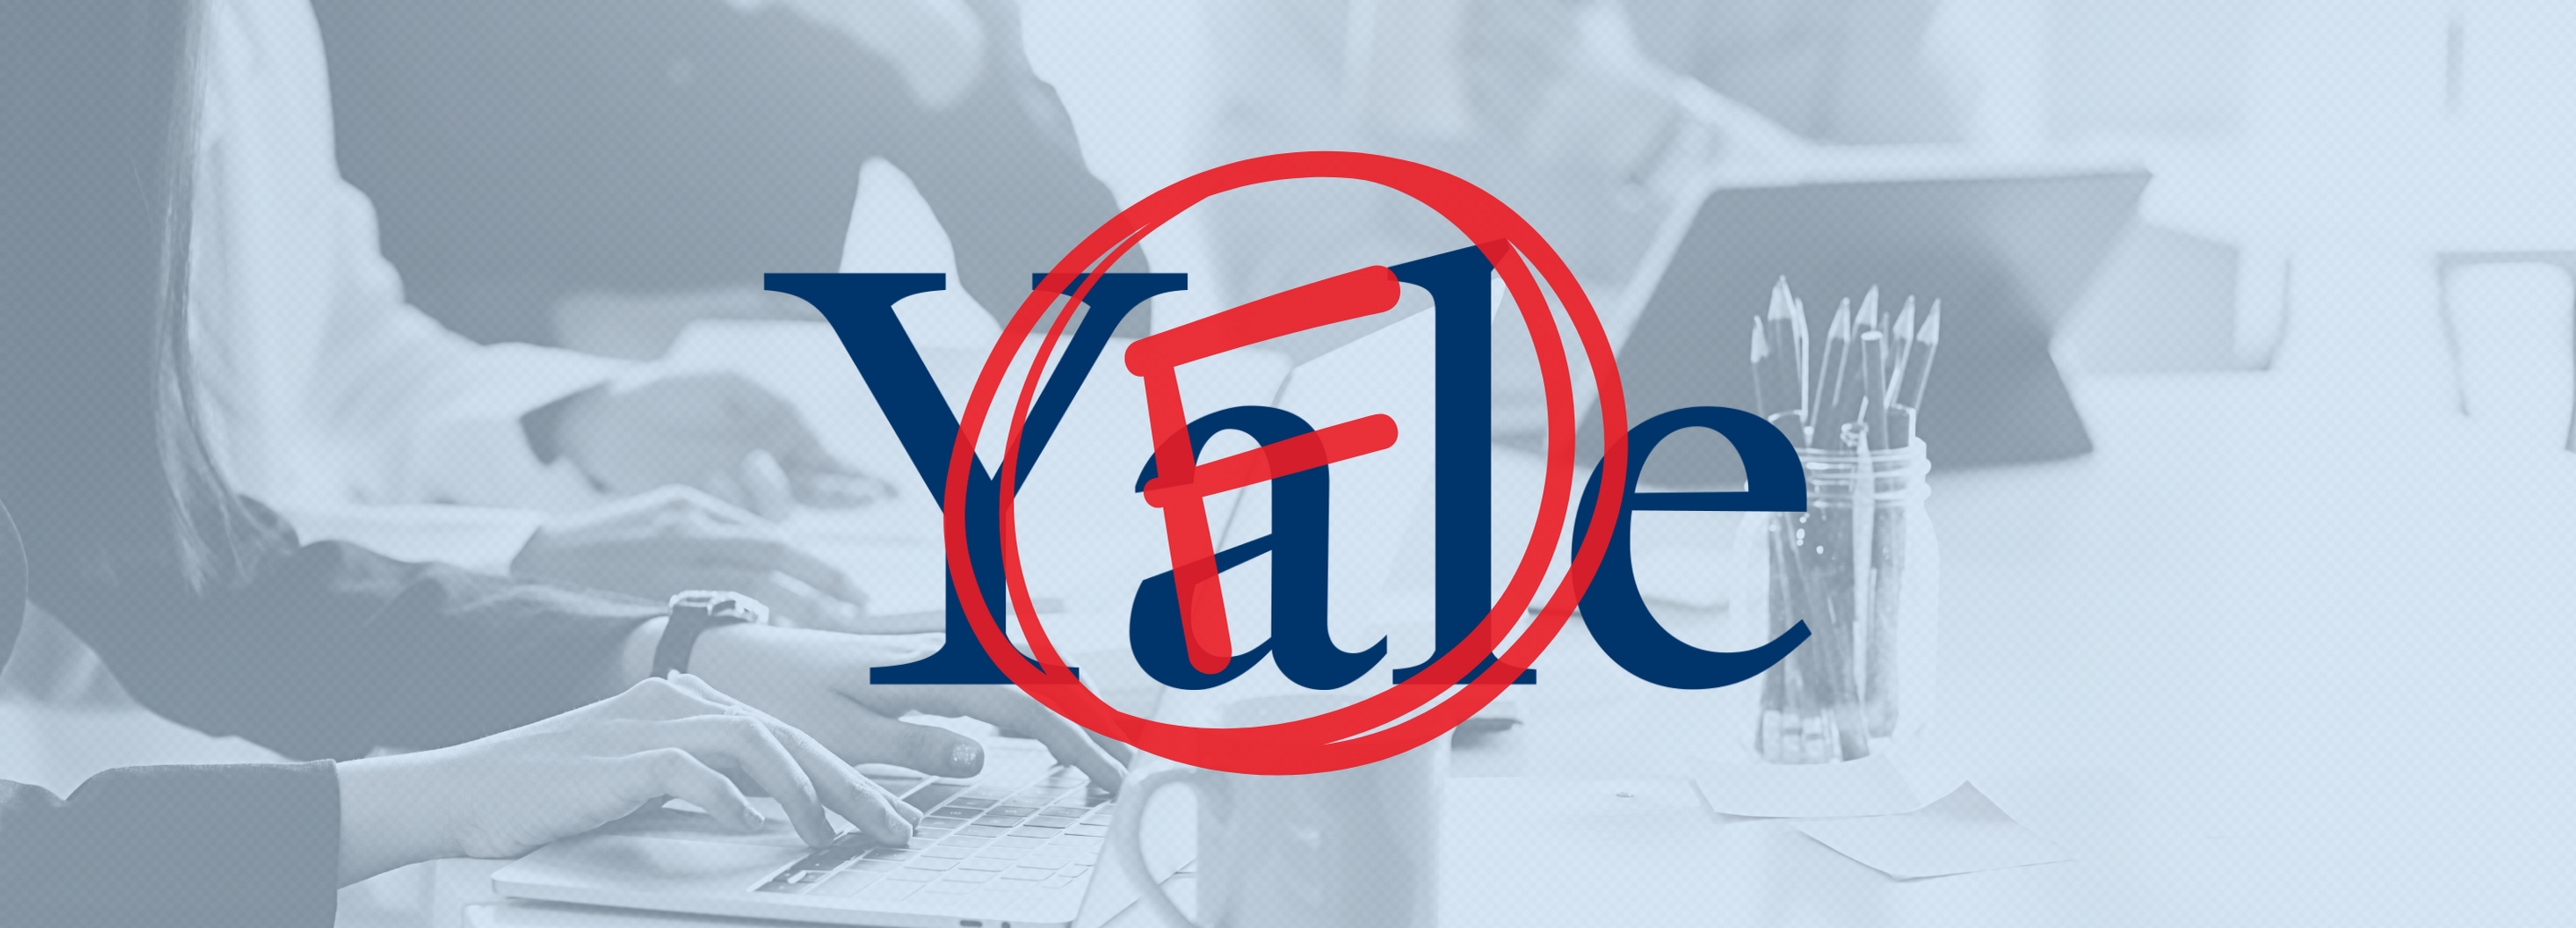 Failing Grade: Yale Declines To Provide Manager Diversity Data